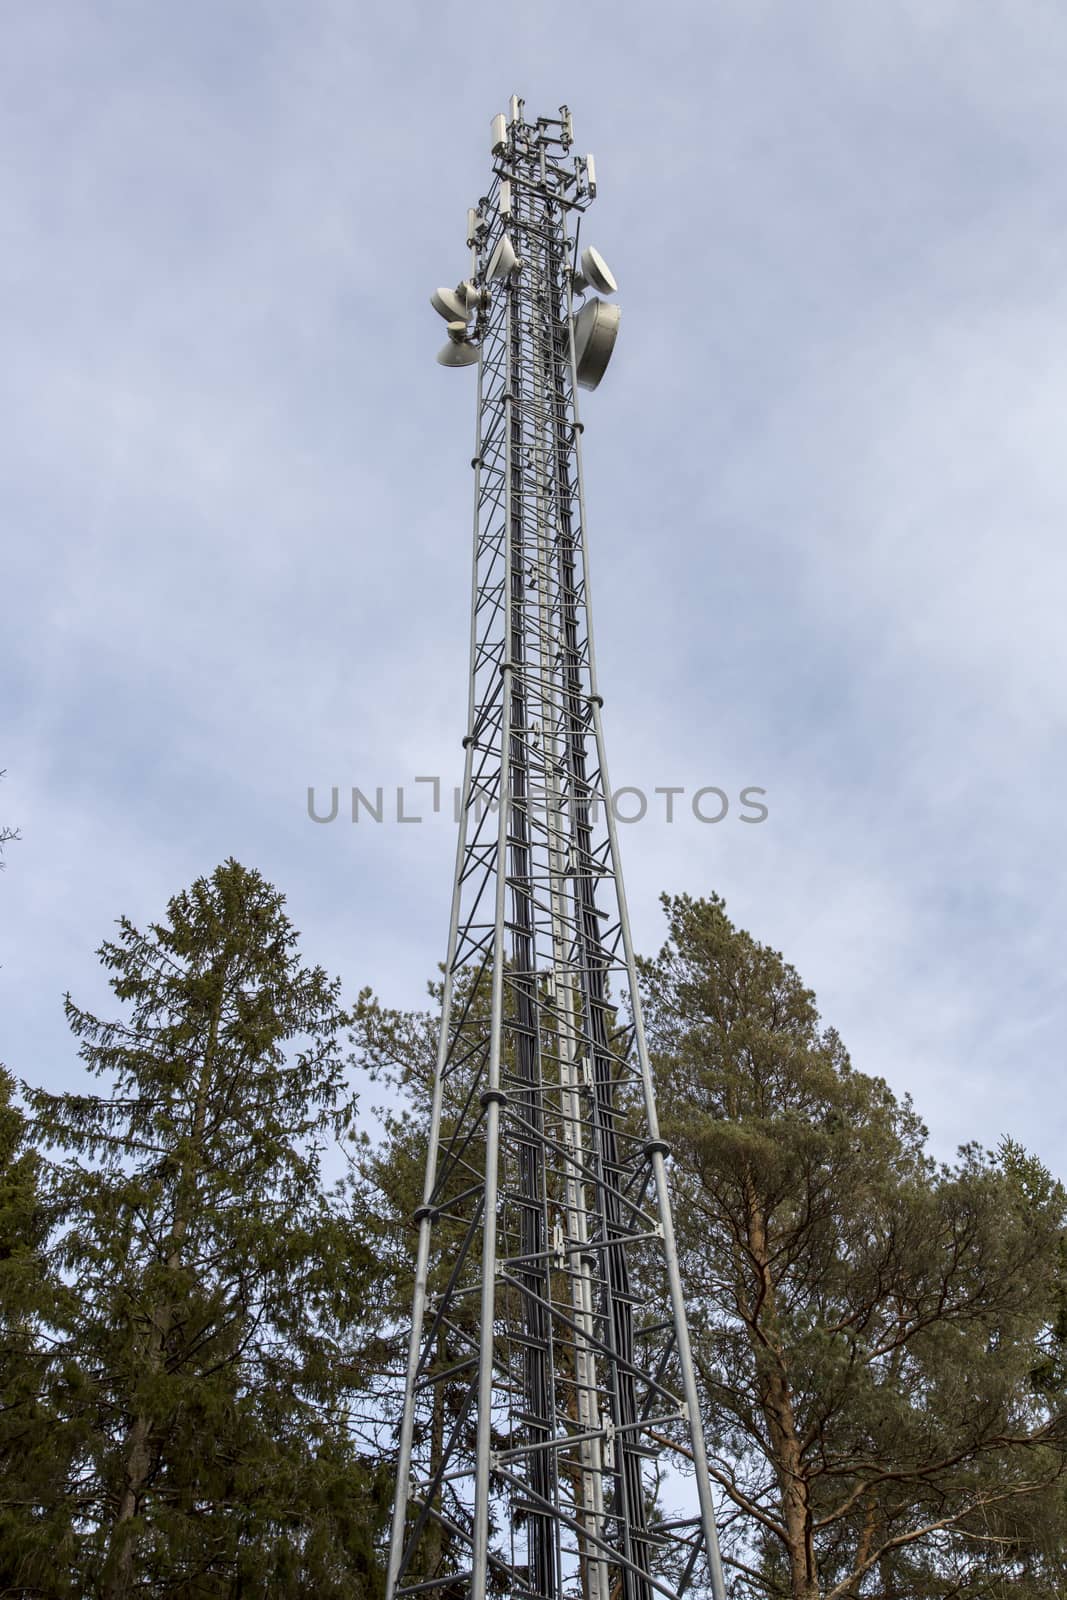 Cellphone Tower with Trees in Sweden